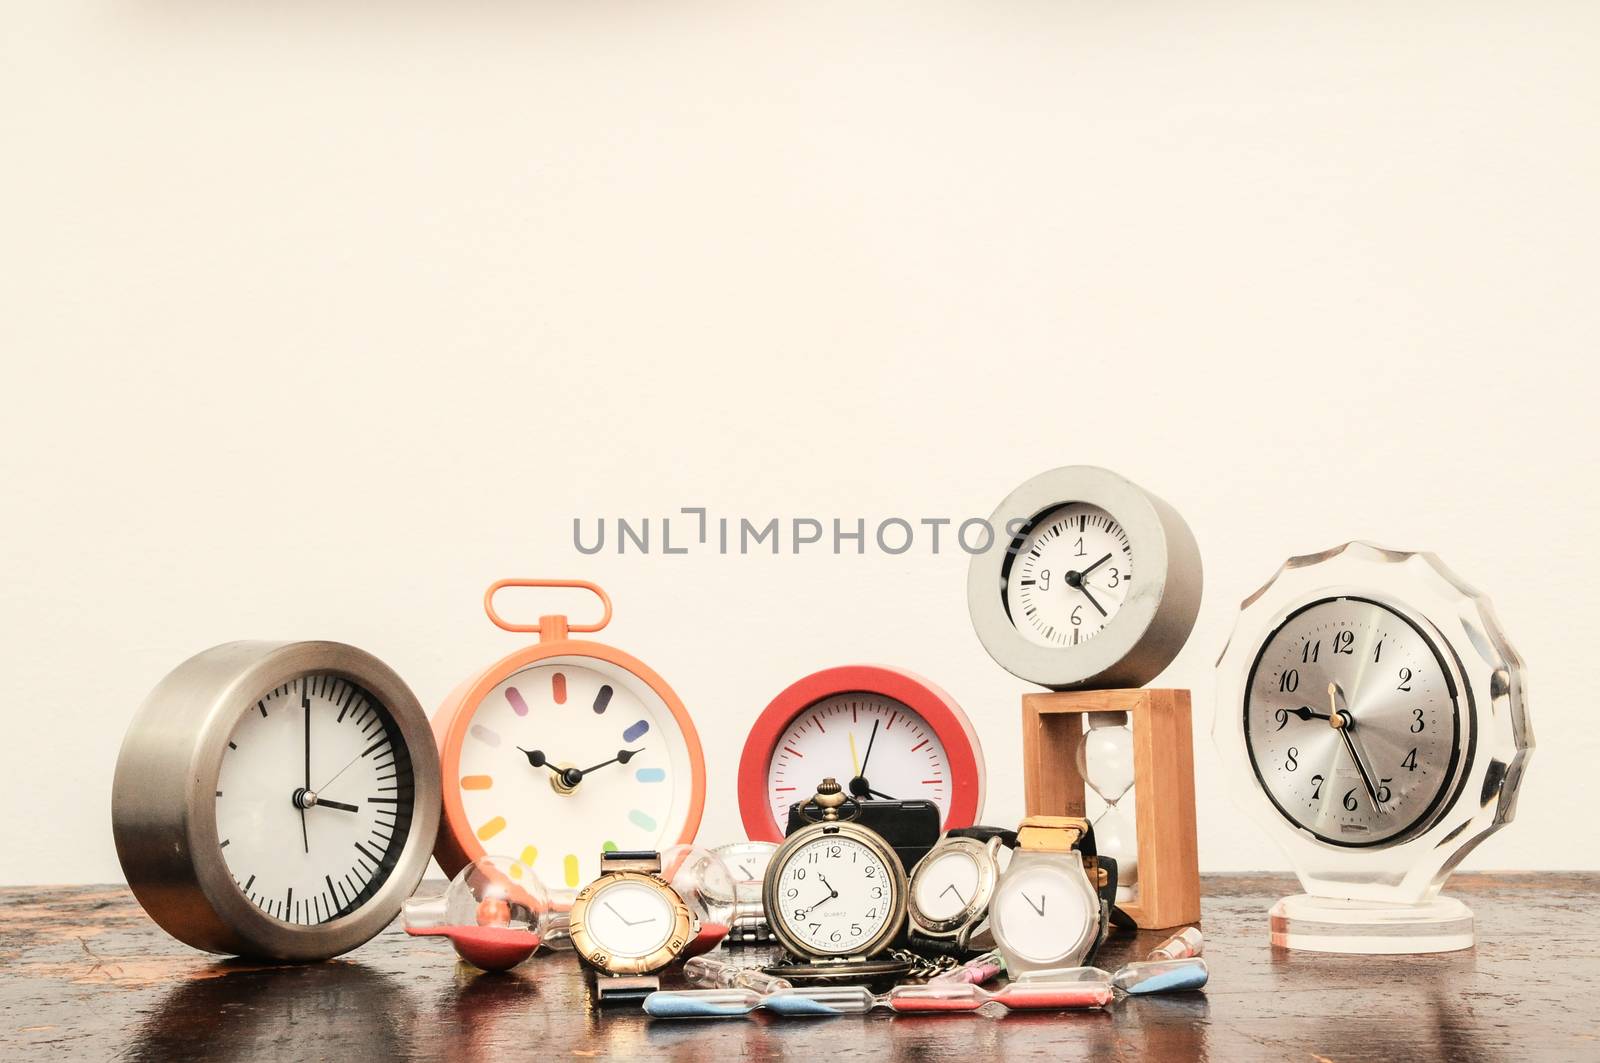 Many Different Clocks on a Woden Table